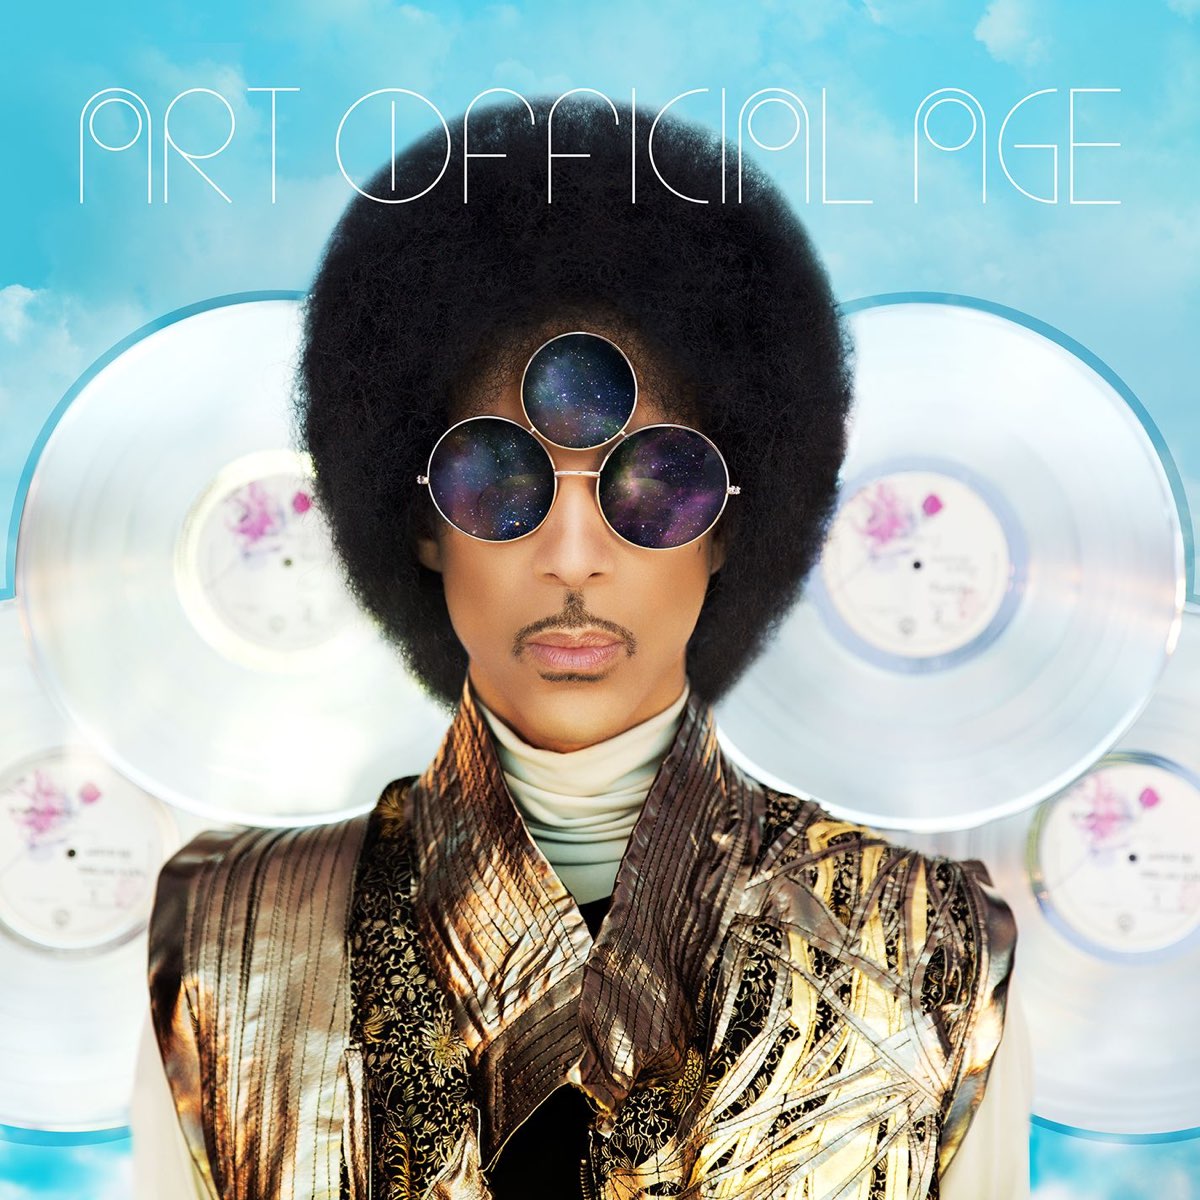 ART OFFICIAL AGE - Album by Prince - Apple Music